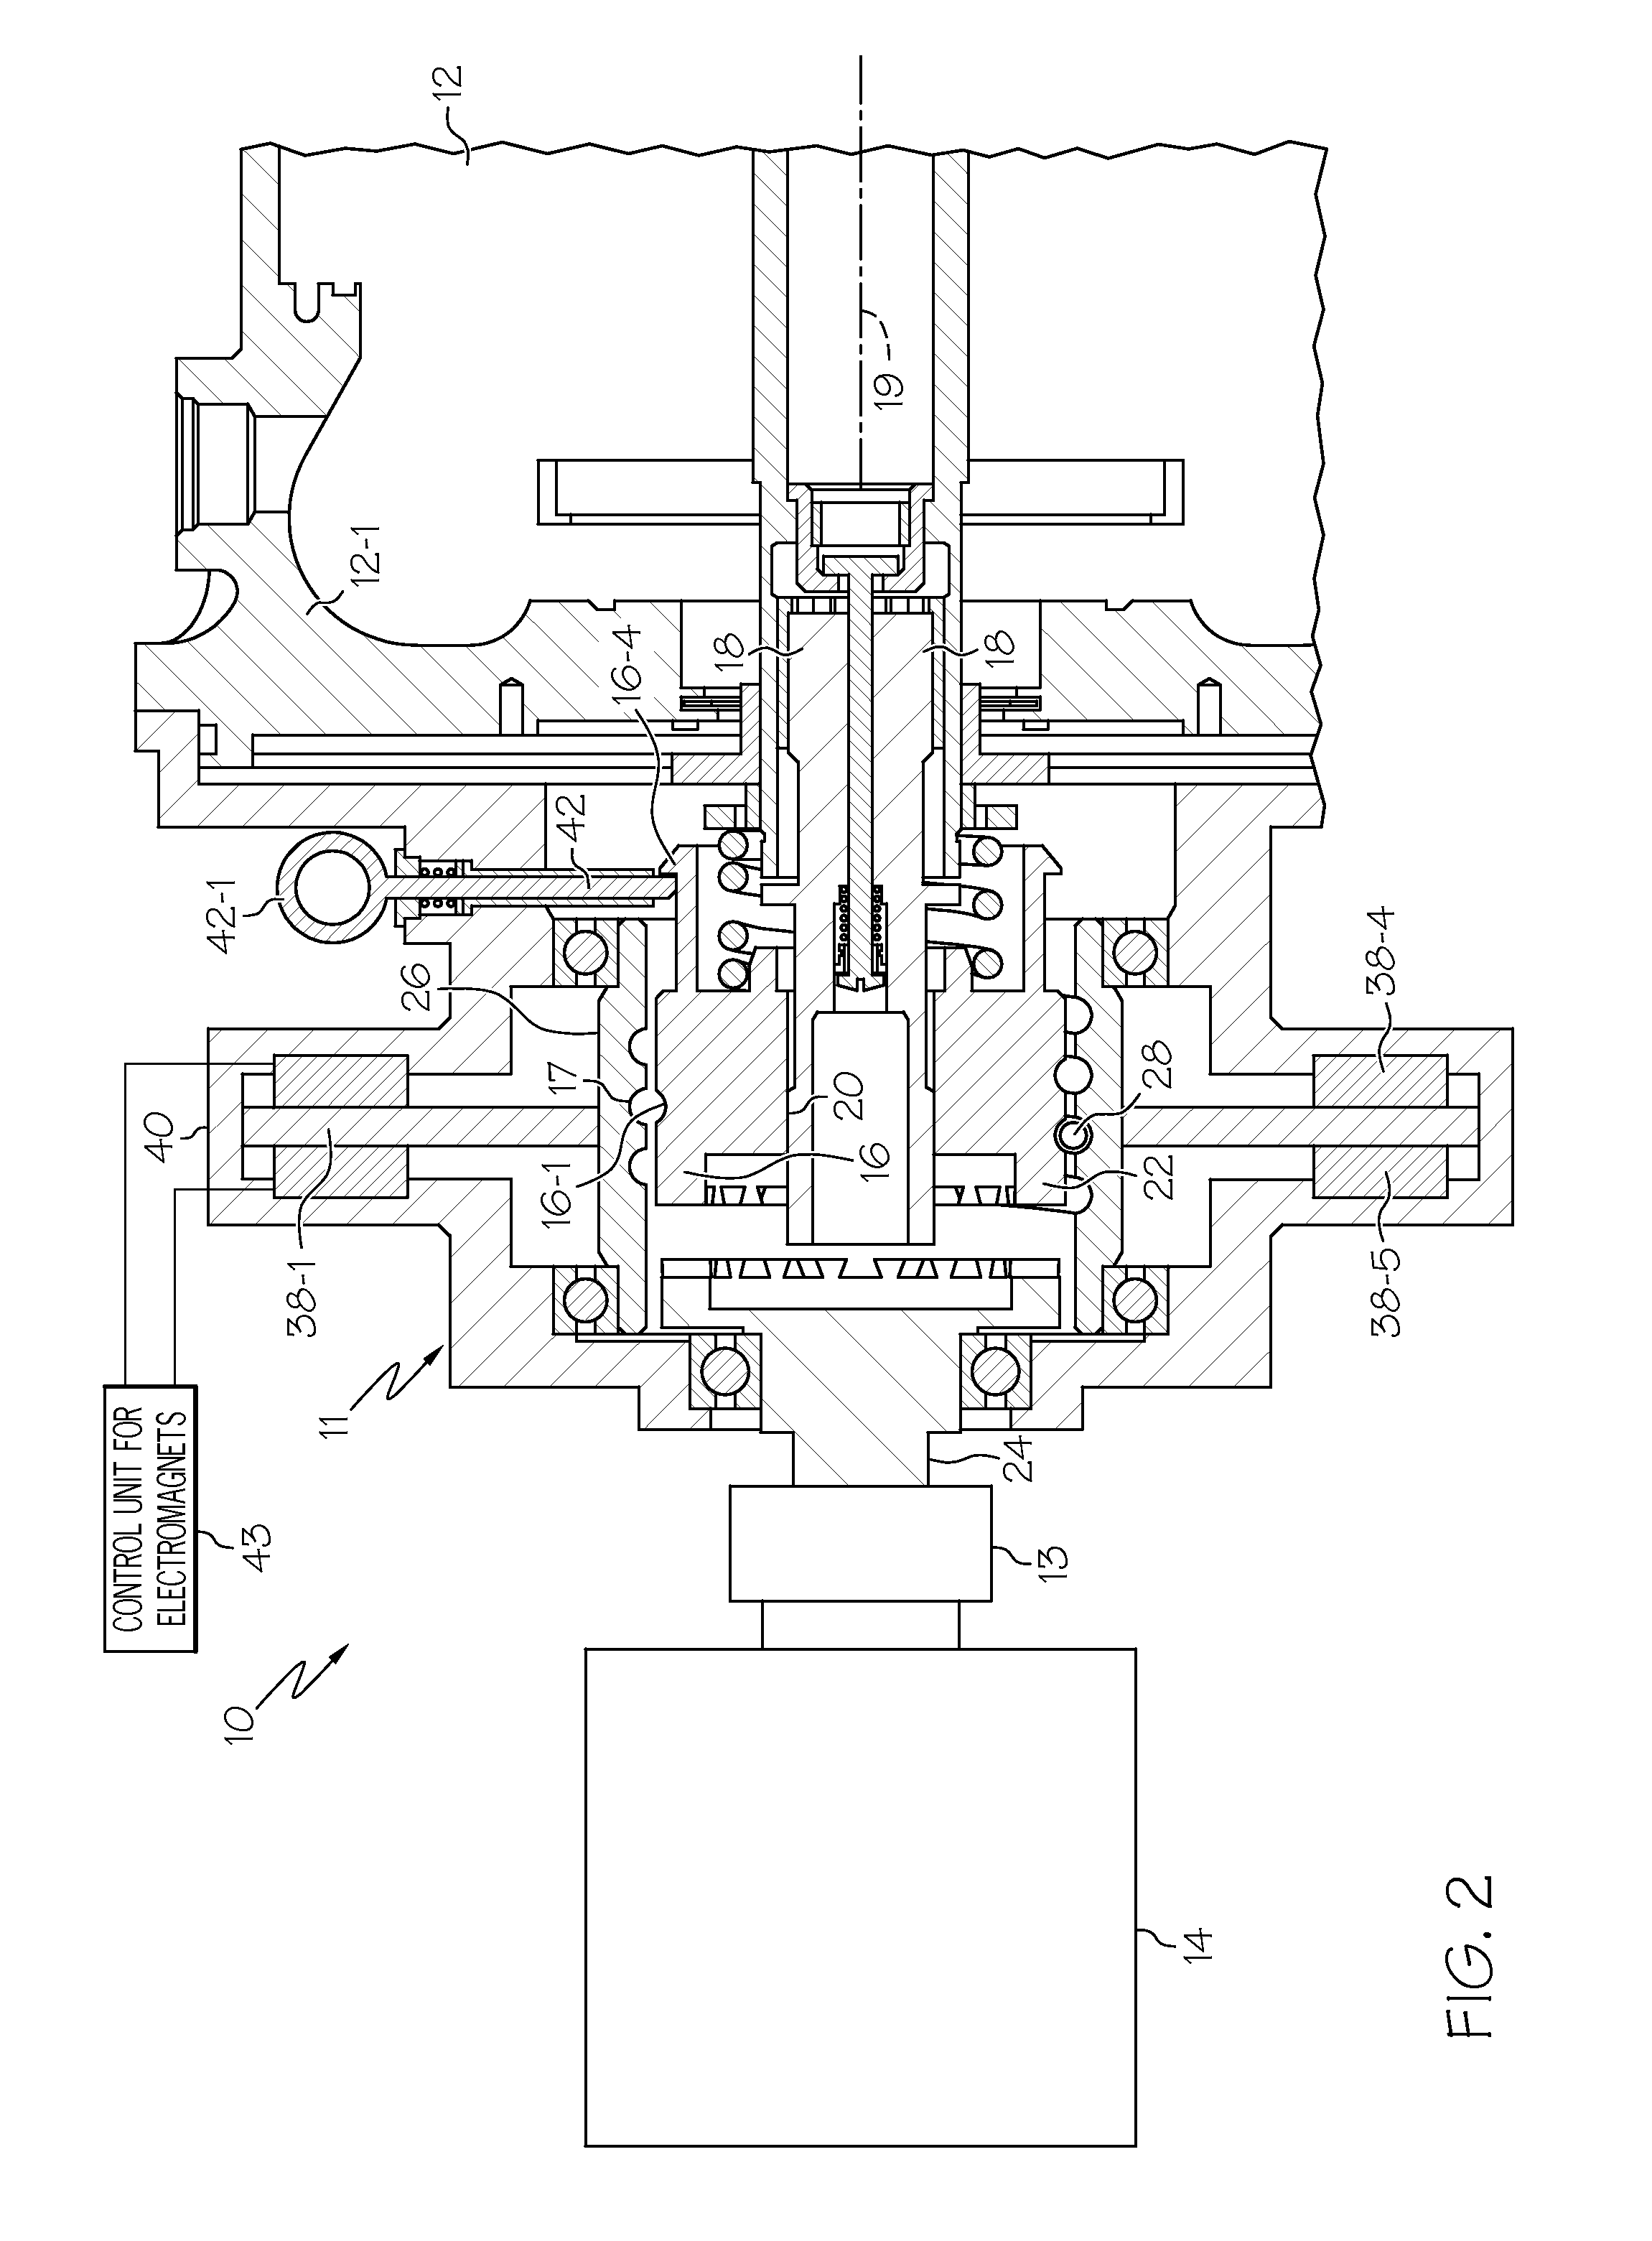 Application of eddy current braking system for use in a gearbox/generator mechanical disconnect